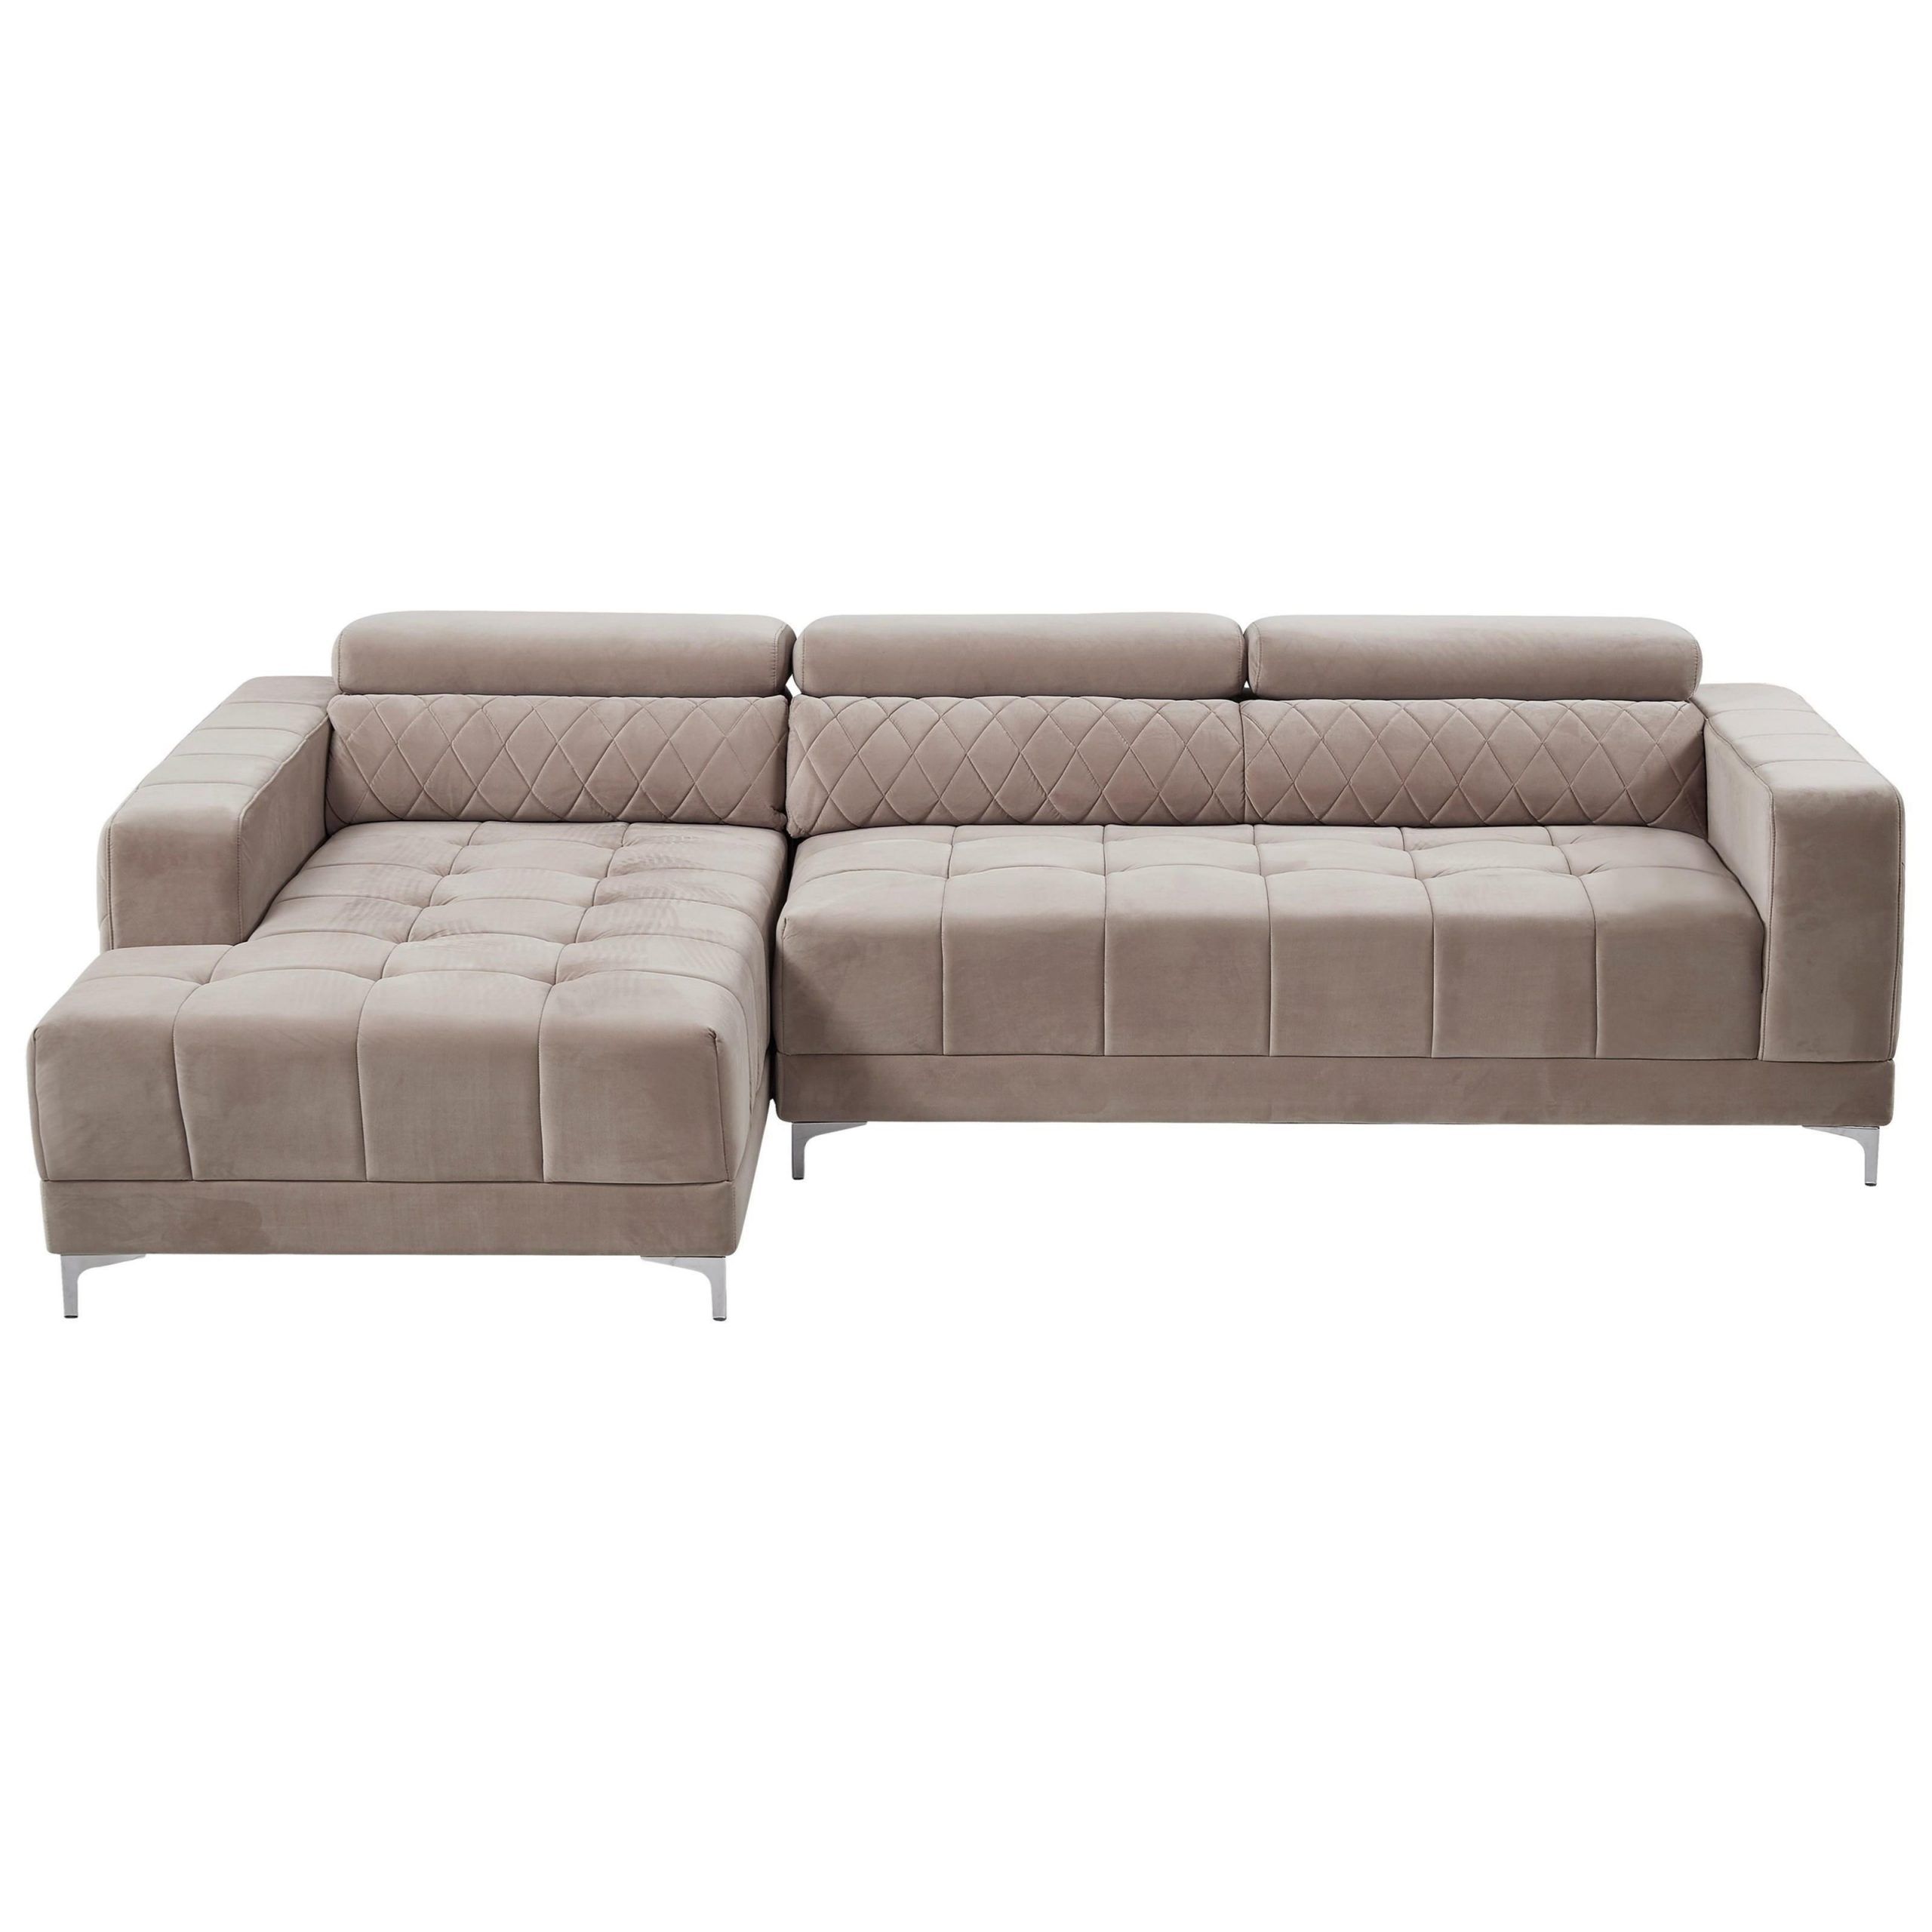 Favorite Global Furniture U0037 Contemporary 2 Piece Sectional With With Regard To 2pc Burland Contemporary Sectional Sofas Charcoal (Photo 5 of 25)